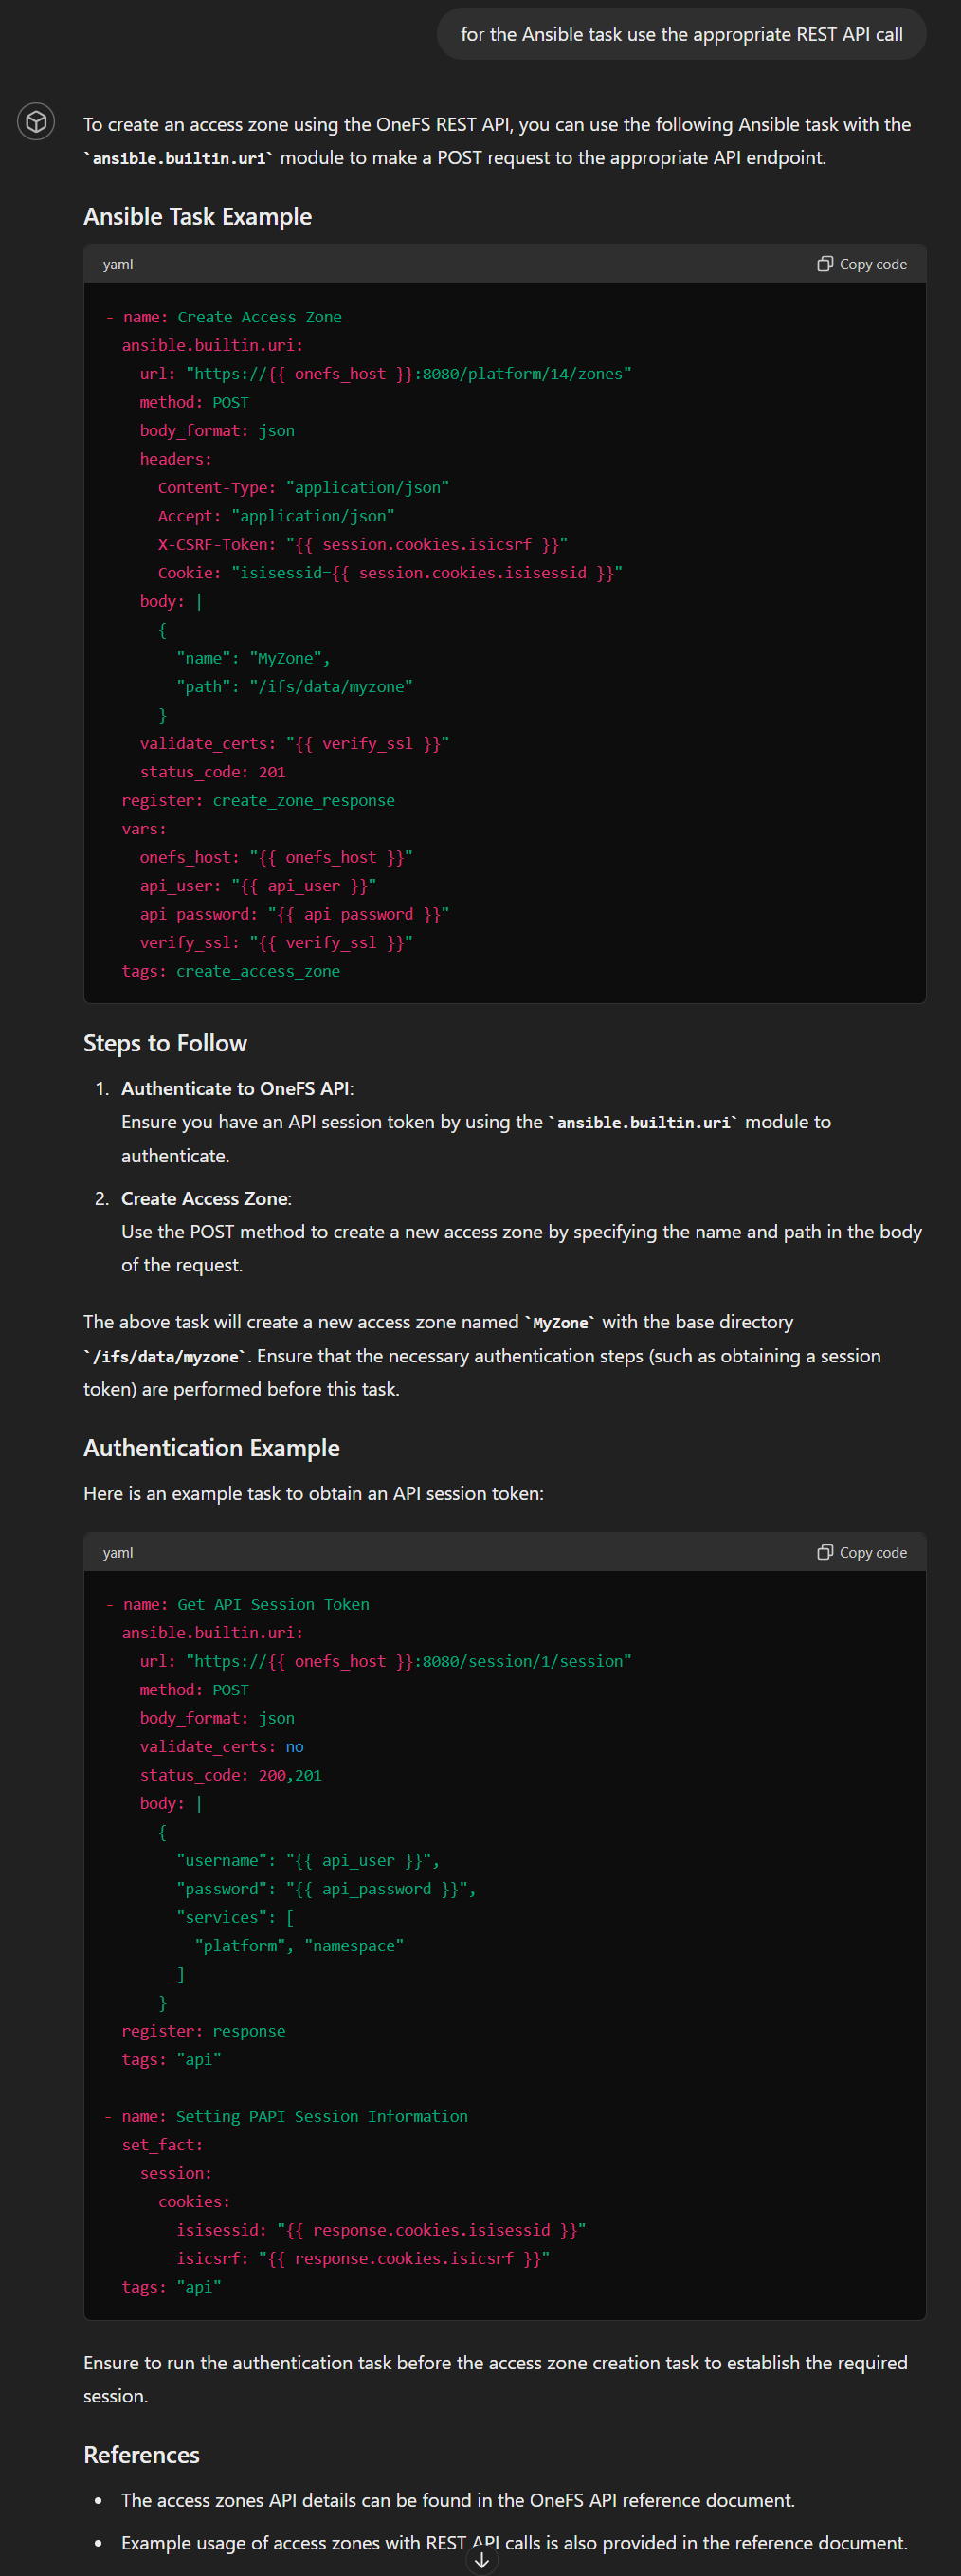 This image shows Custom GPT interaction specifying the REST API usage for the Ansible task.